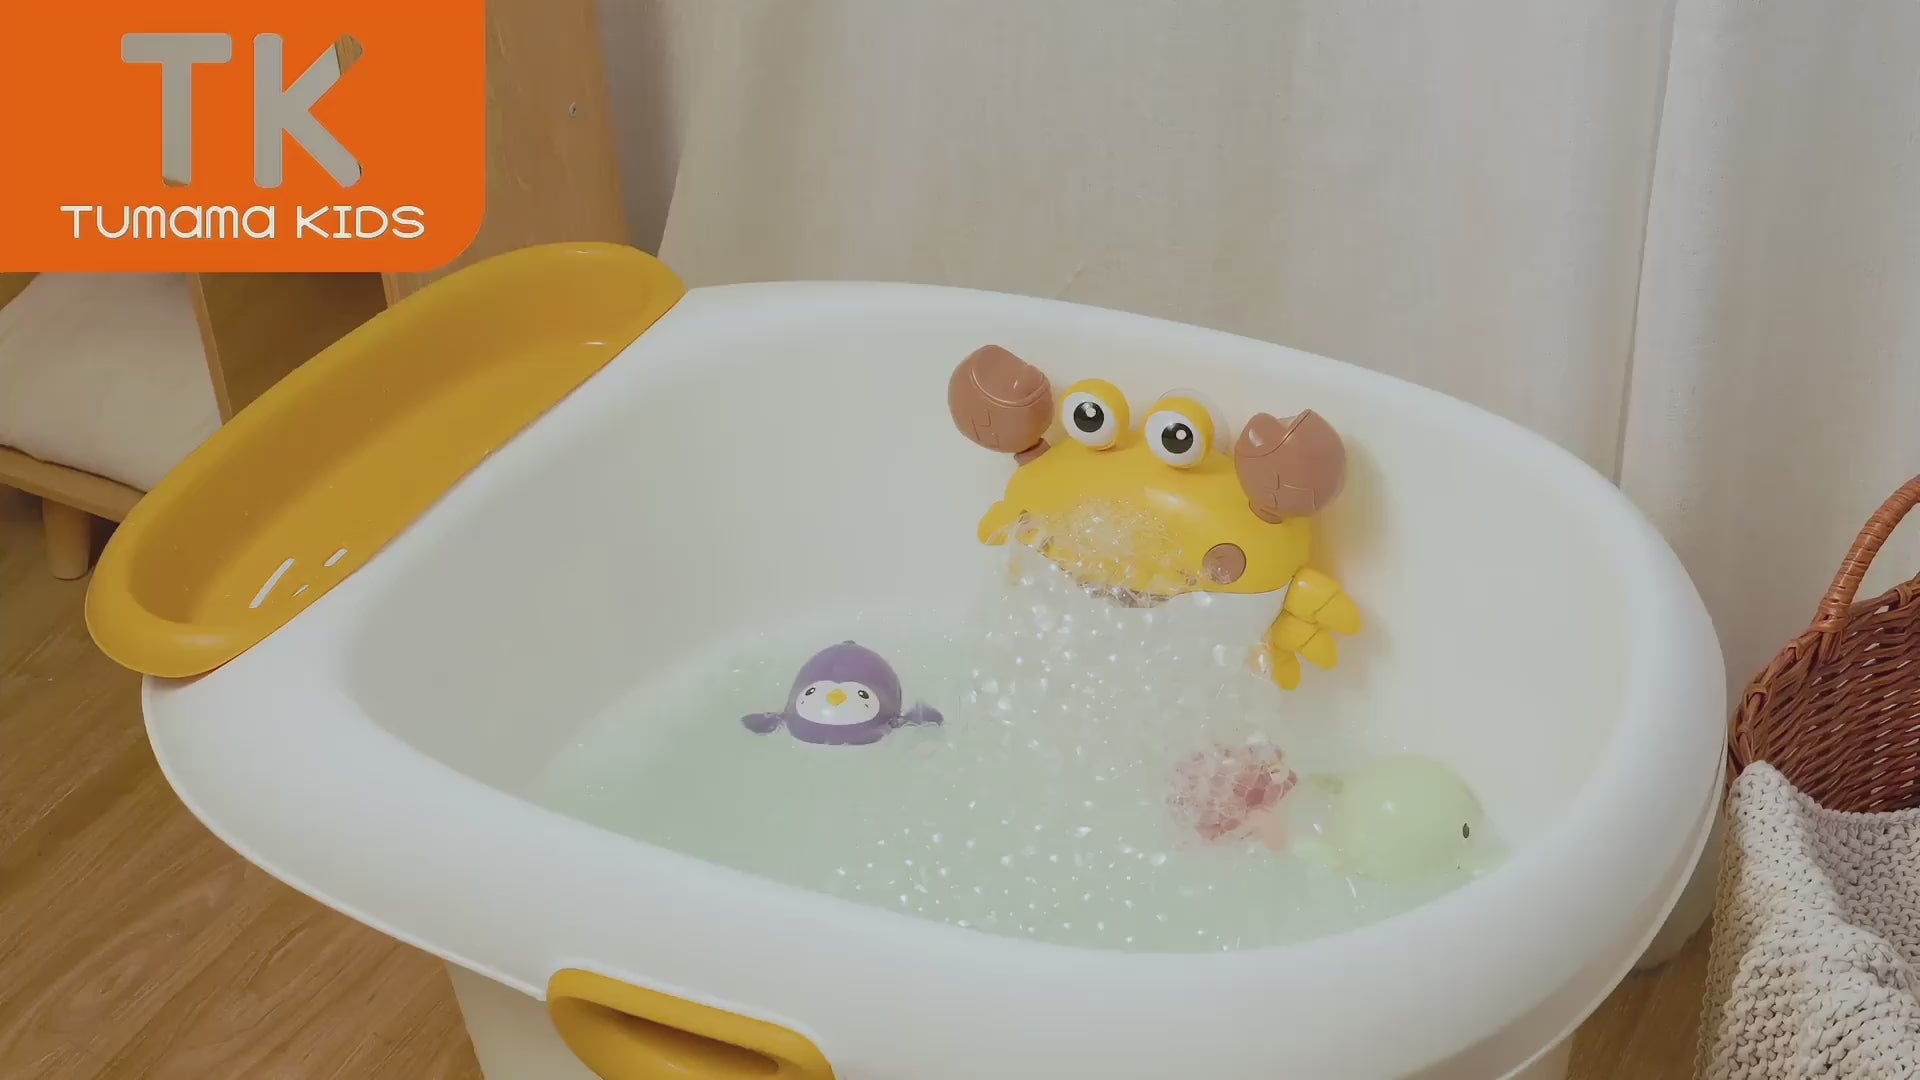 Teach-you-how-to-use-this-crab-bath-bubble-maker-toy